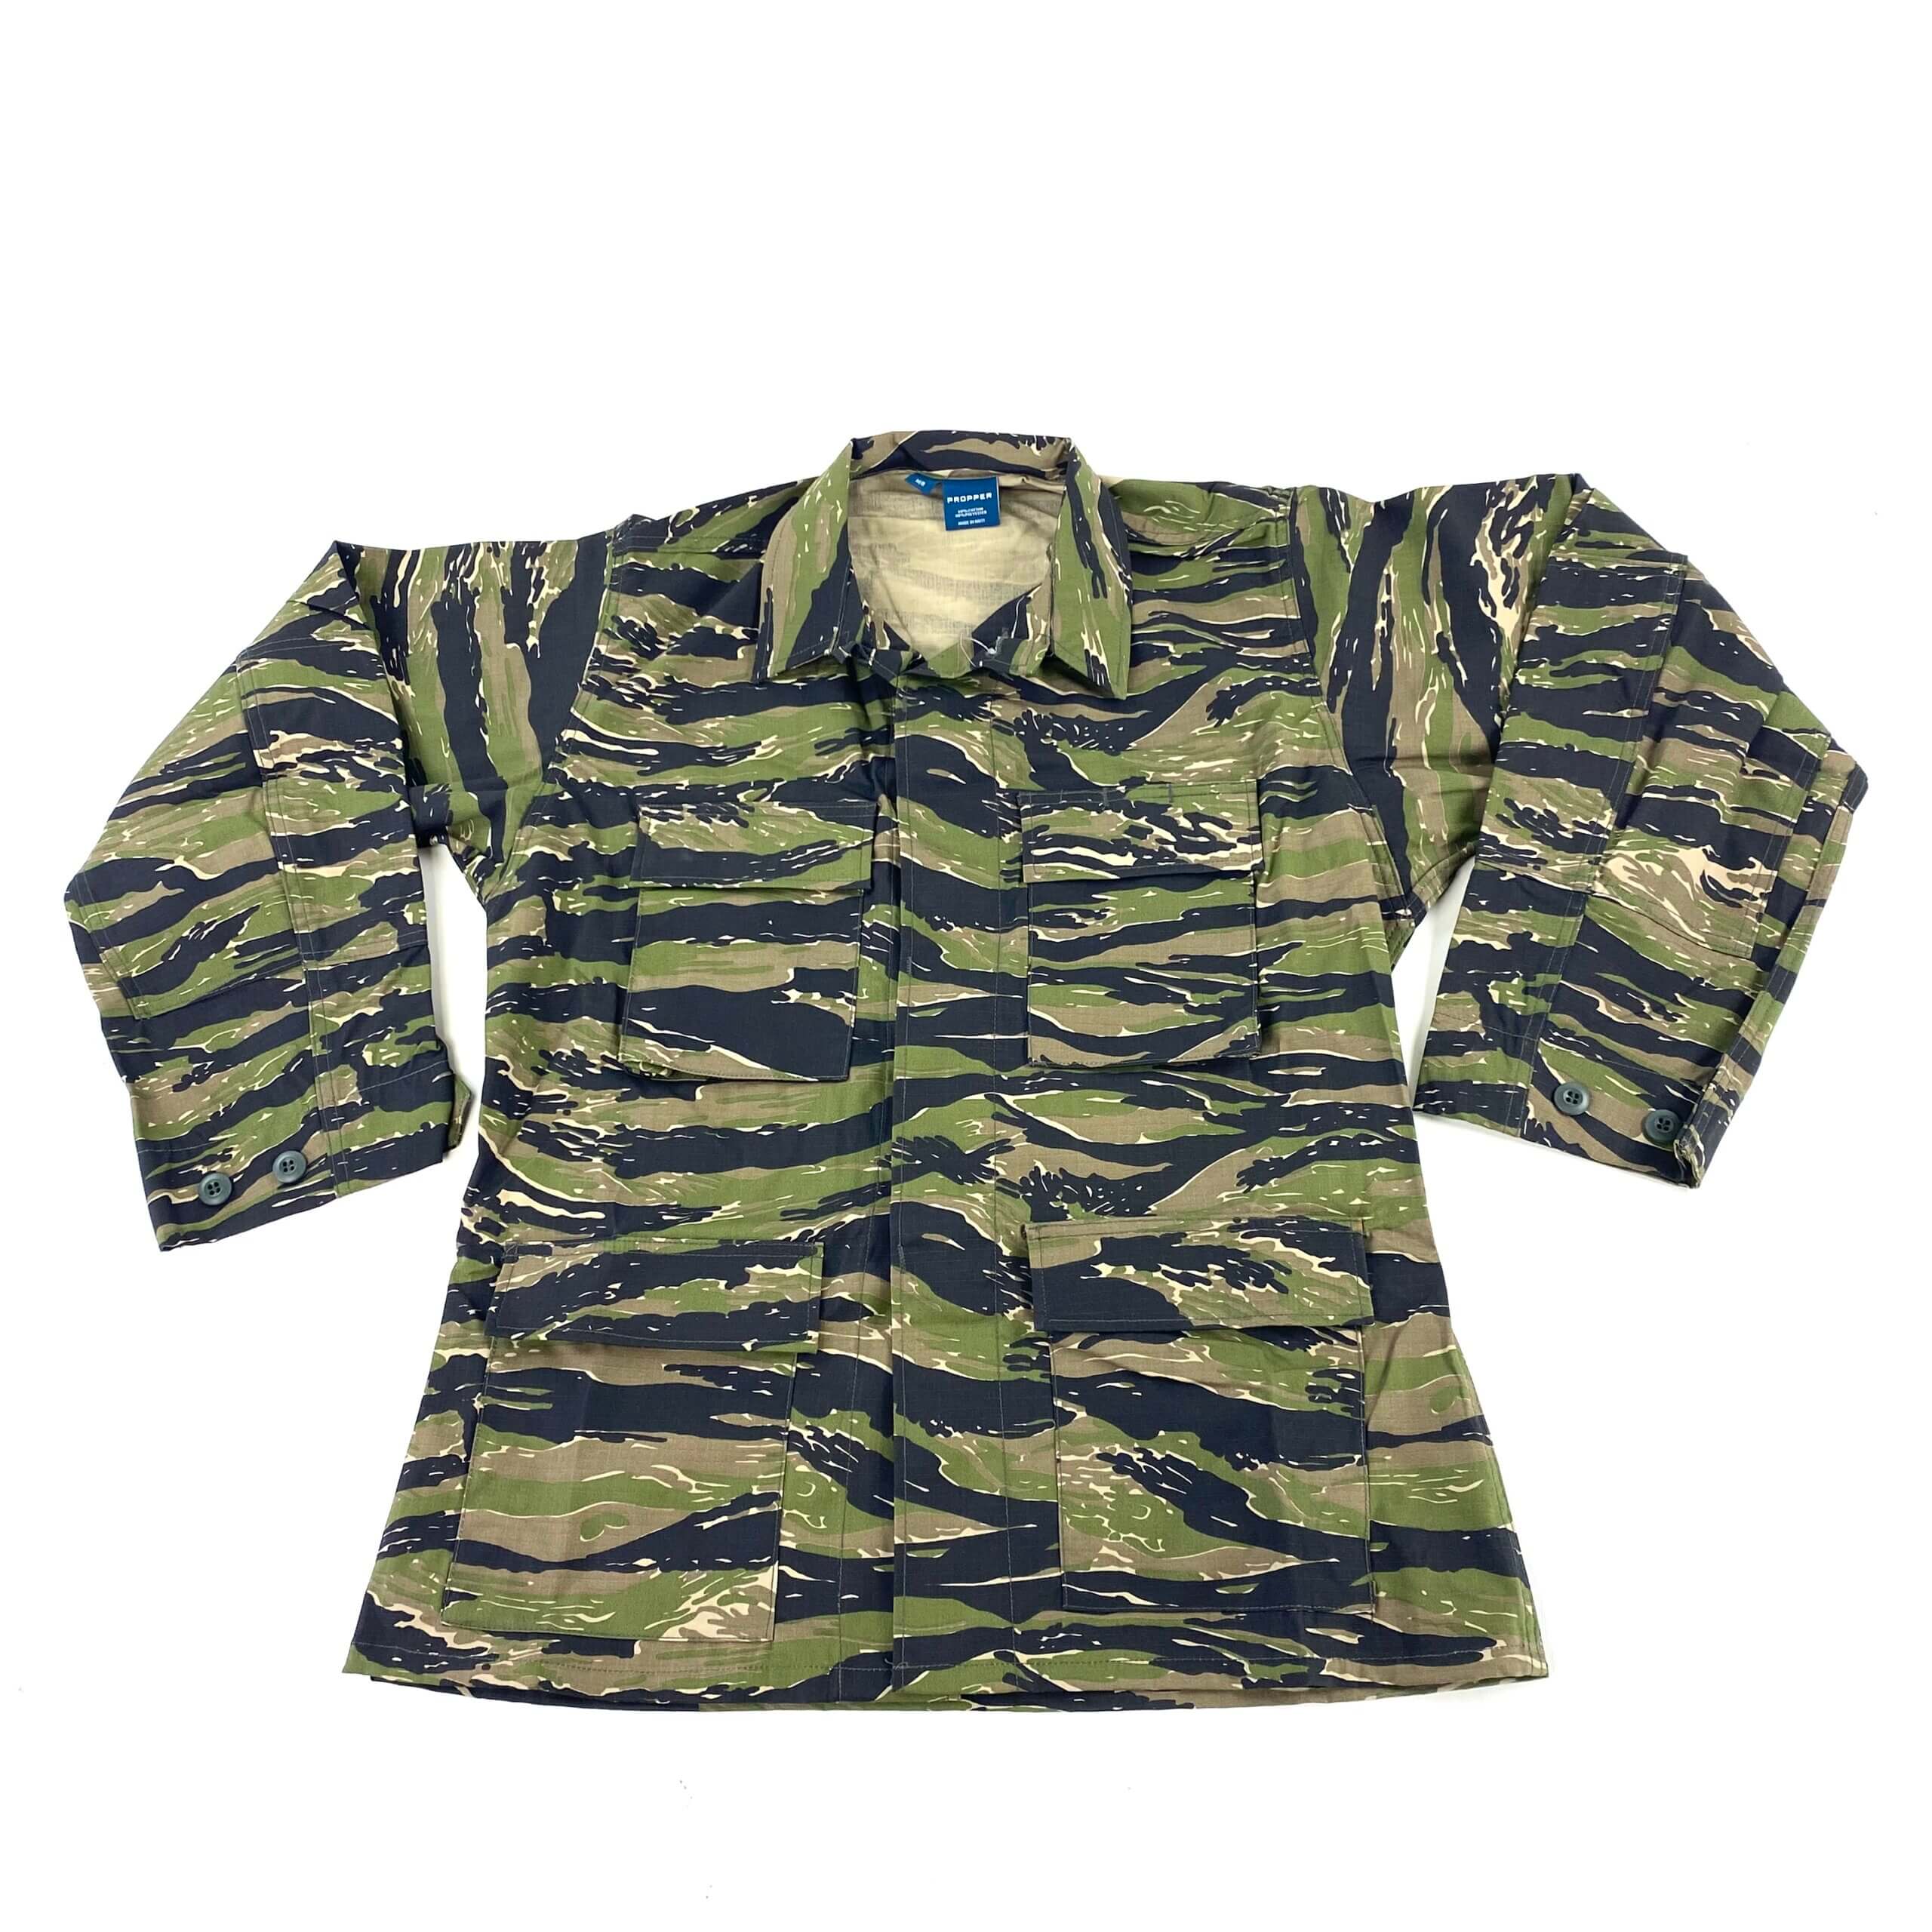 Tiger Stripe Reproduction uniforms available now! | Indiana Gun Owners ...